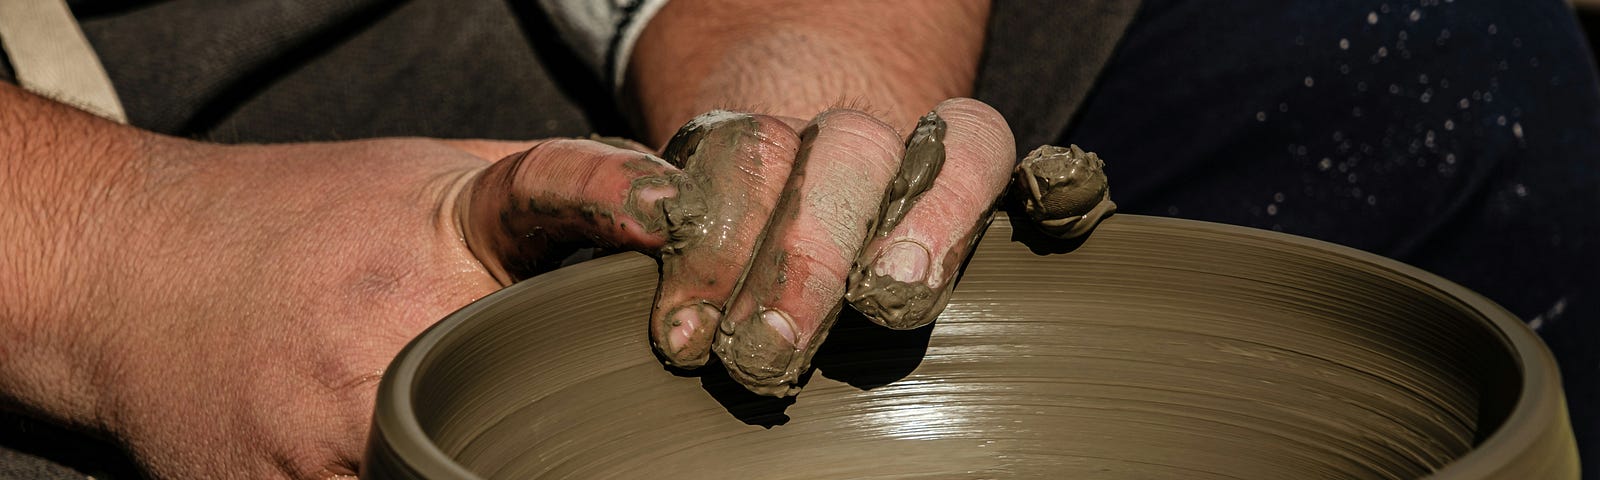 A potter sculpting a large clay bowl on a wheel.